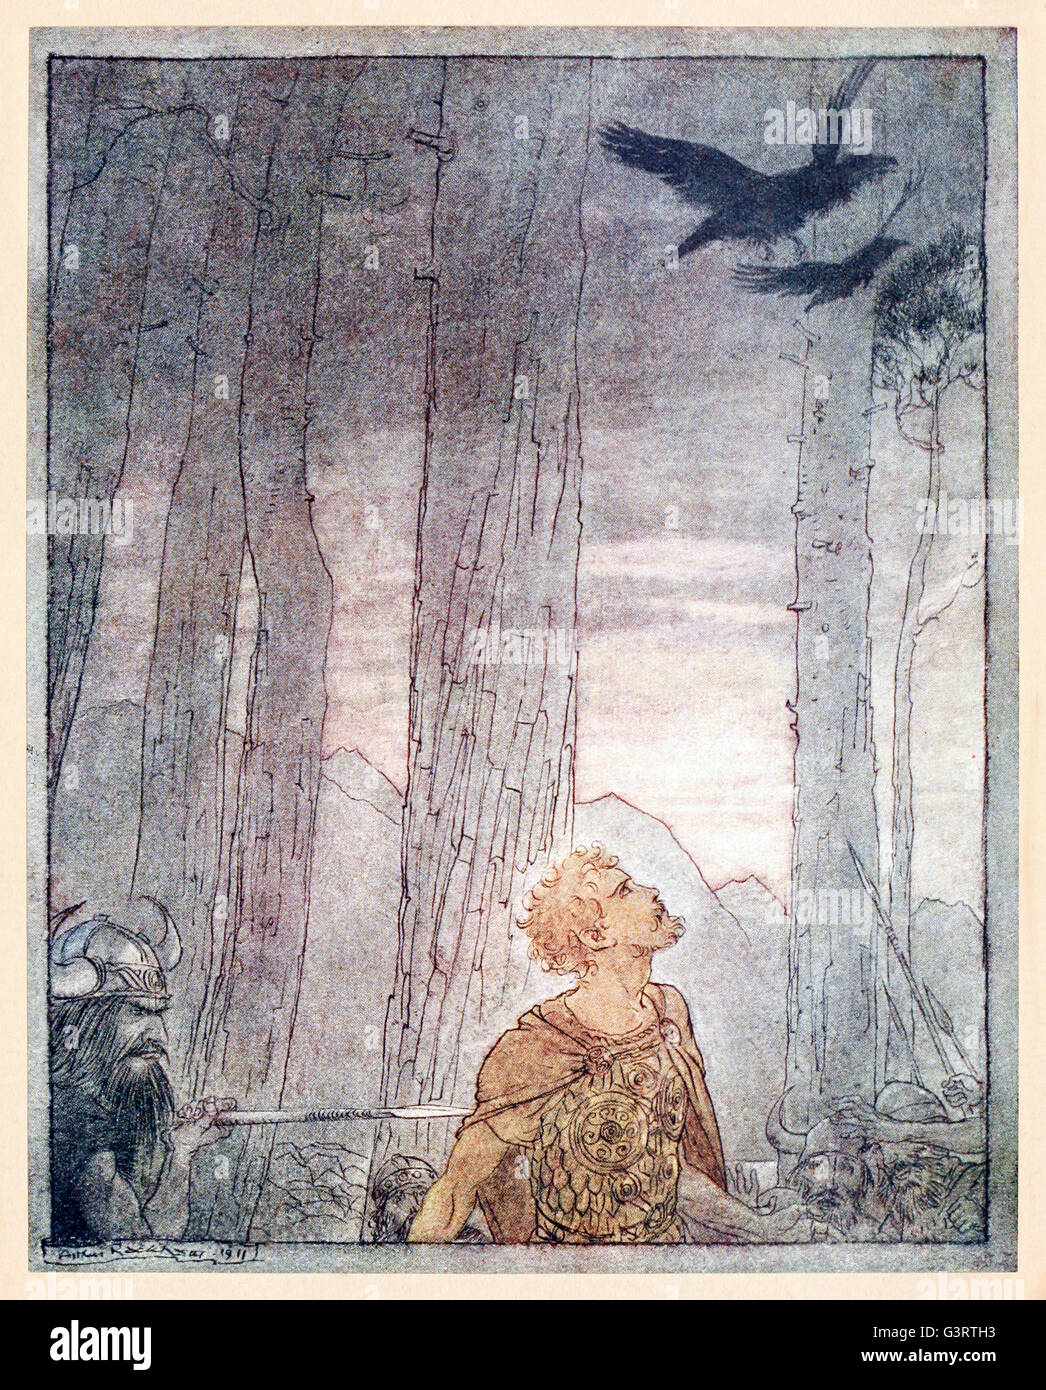 “Siegfried’s death” from 'Siegfried & The Twilight of the Gods' illustrated by Arthur Rackham (1867-1939). Hagen stabs Siegfried in the back with his spear as Wotan's ravens fly overhead. See description for more information. Stock Photo